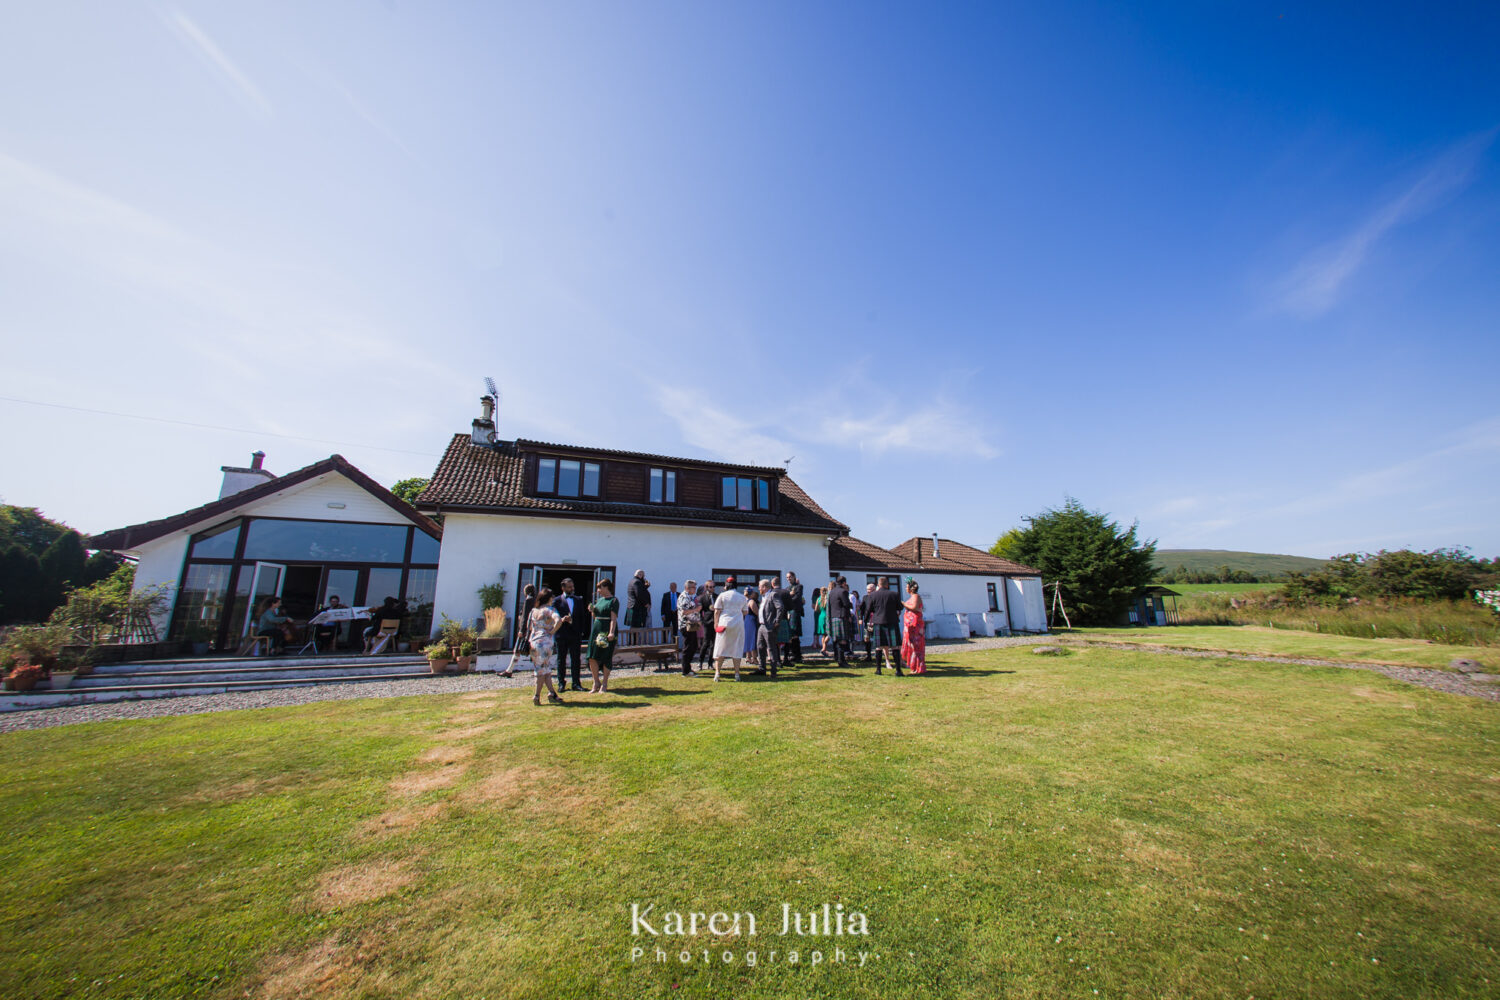 exterior photo of the farmhouse at Fruin Farm with guests mingling on the grass area